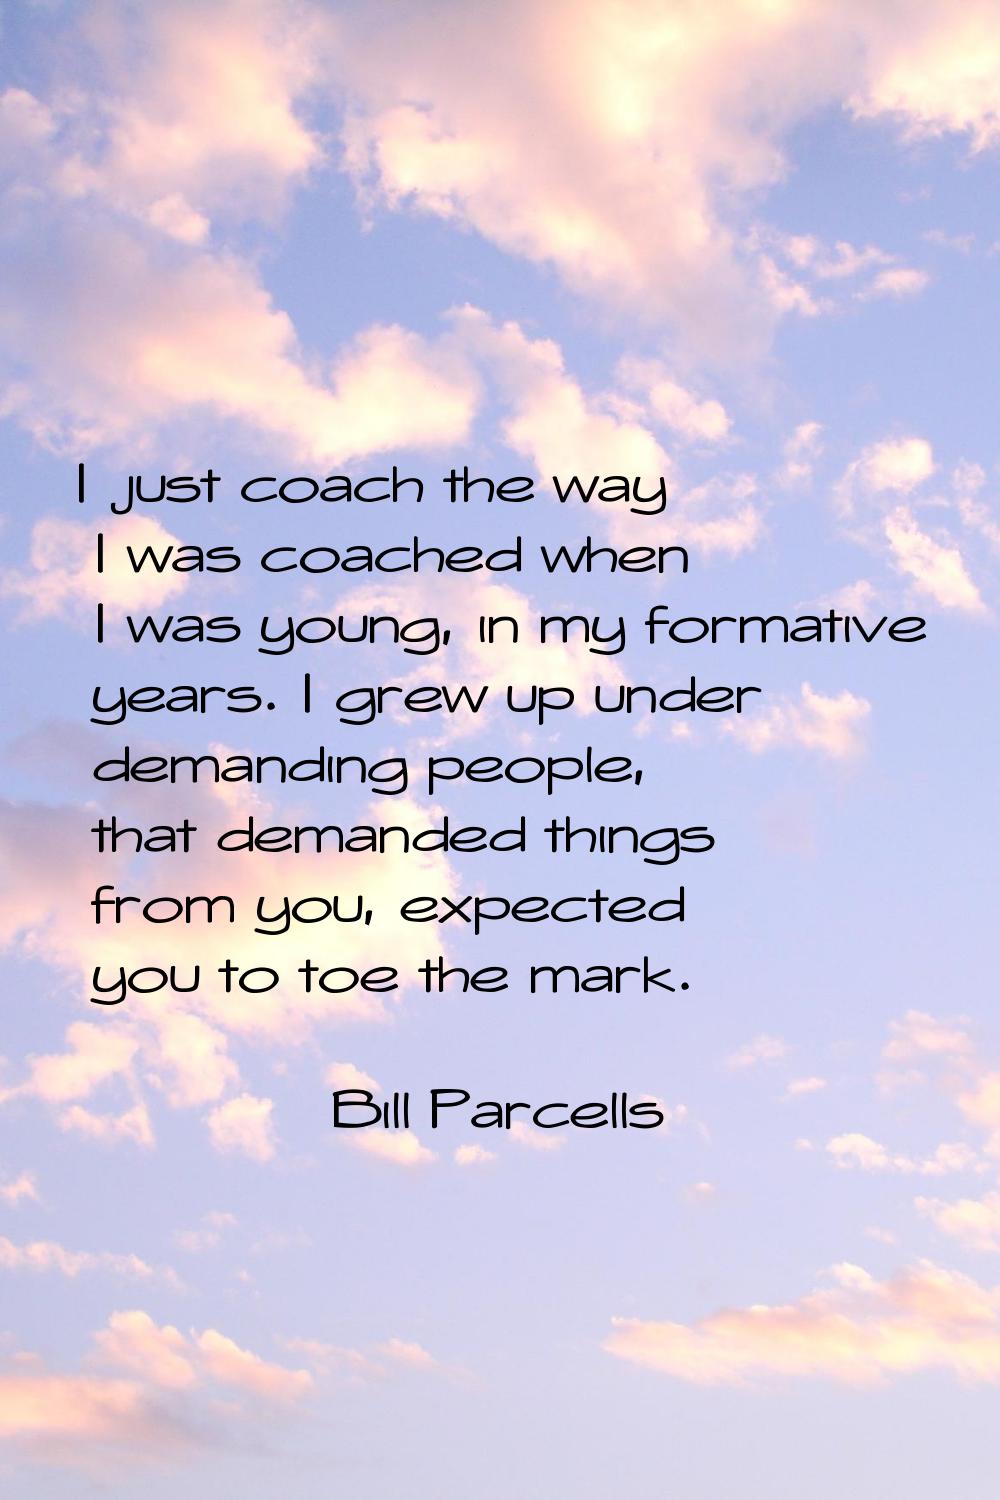 I just coach the way I was coached when I was young, in my formative years. I grew up under demandi